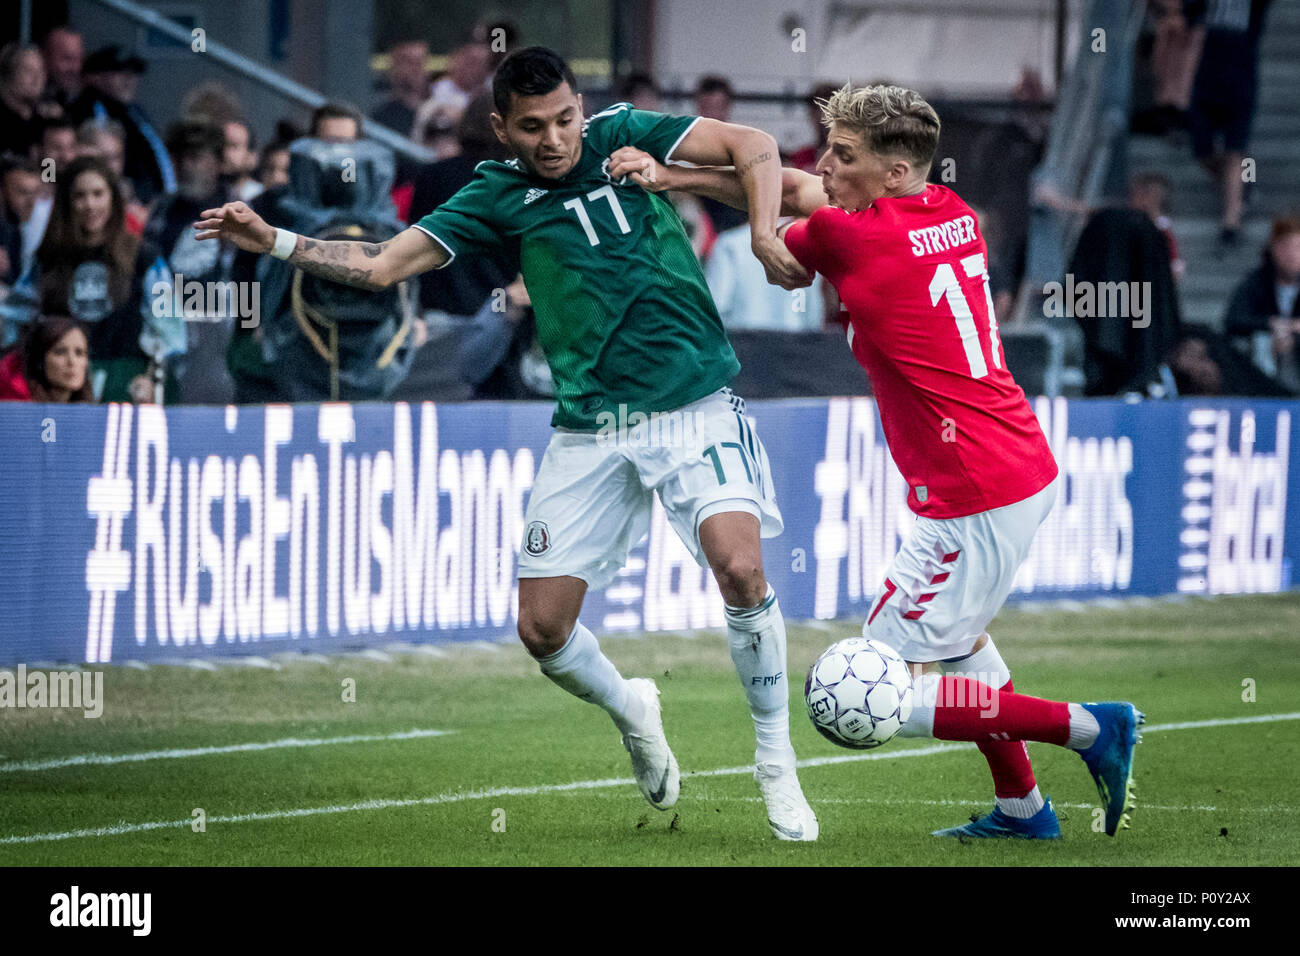 Denmark, Brøndby - June 09, 2018. Jesus Corona (17) of Mexico and Jens Stryger Larsen (17) of Denmark seen during the football friendly between Denmark and Mexico at Brøndby Stadion. (Photo credit: Gonzales Photo - Kim M. Leland). Credit: Gonzales Photo/Alamy Live News Stock Photo